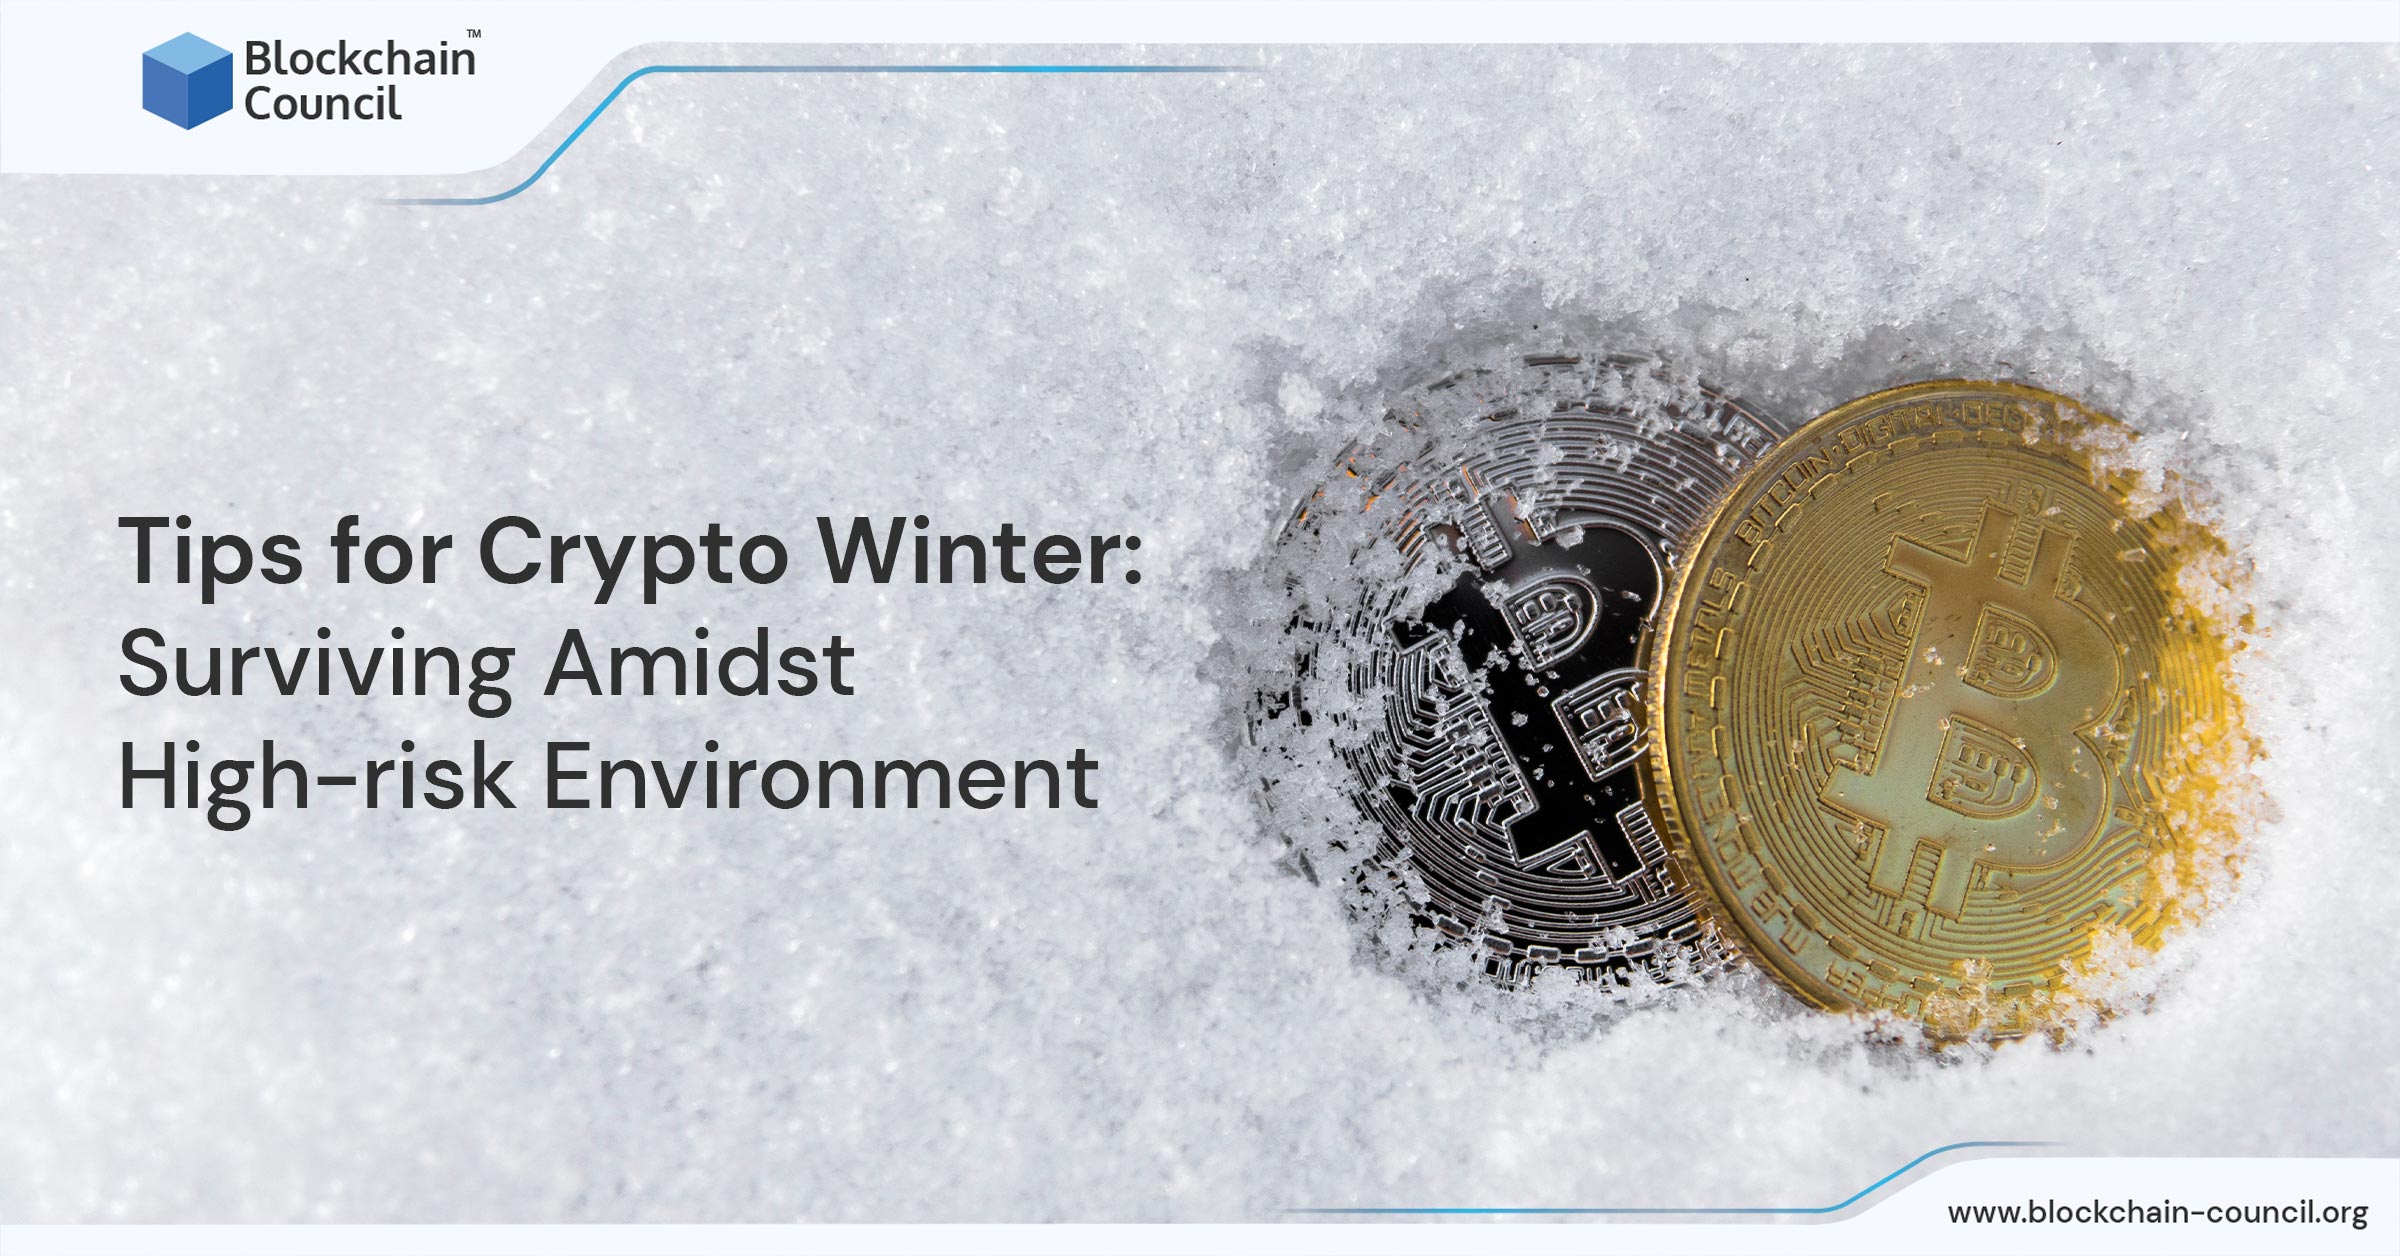 Tips for Crypto Winter Surviving Amidst Highrisk Environment